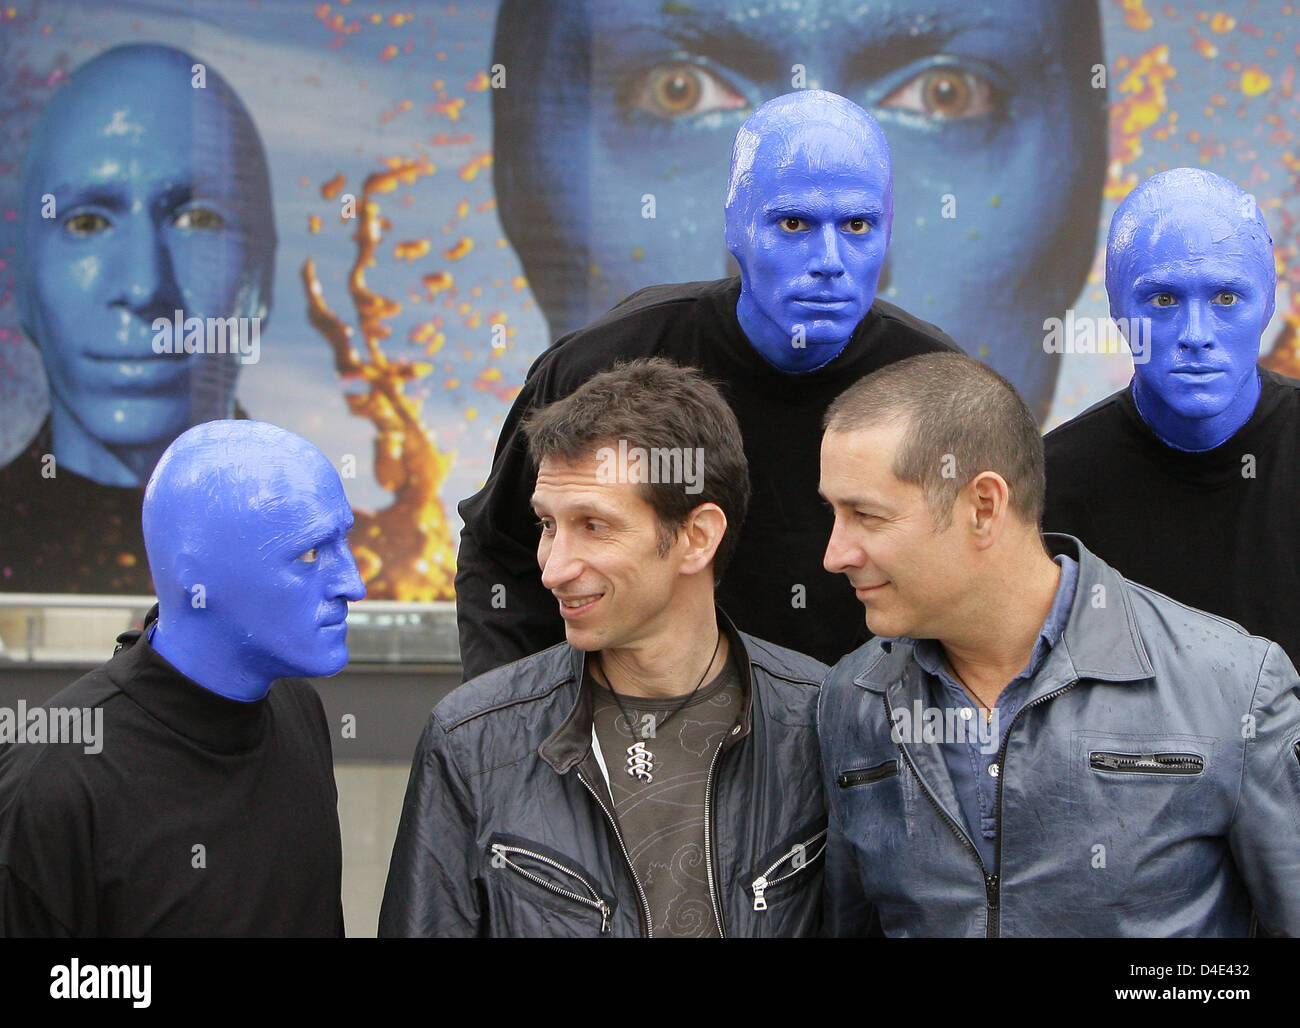 Matt Goldman (2-L) and Phil Stanton (2-R) of Blue Man Group pose for photos  in Berlin, Germany, 16 May 2008. After four years on stage with 1.5 million  spectators, the Blue Man